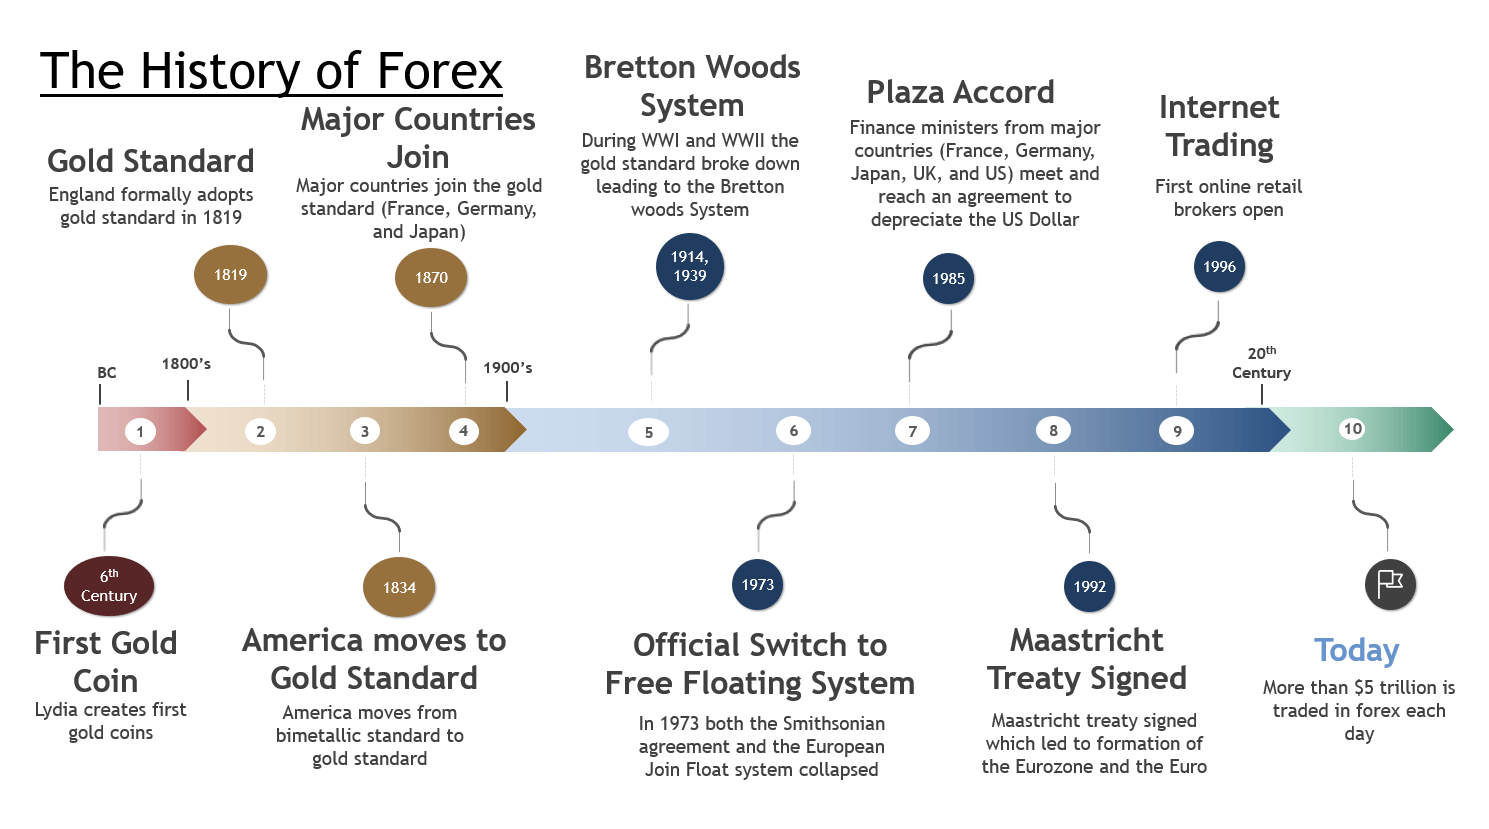 History of the forex market how it all began